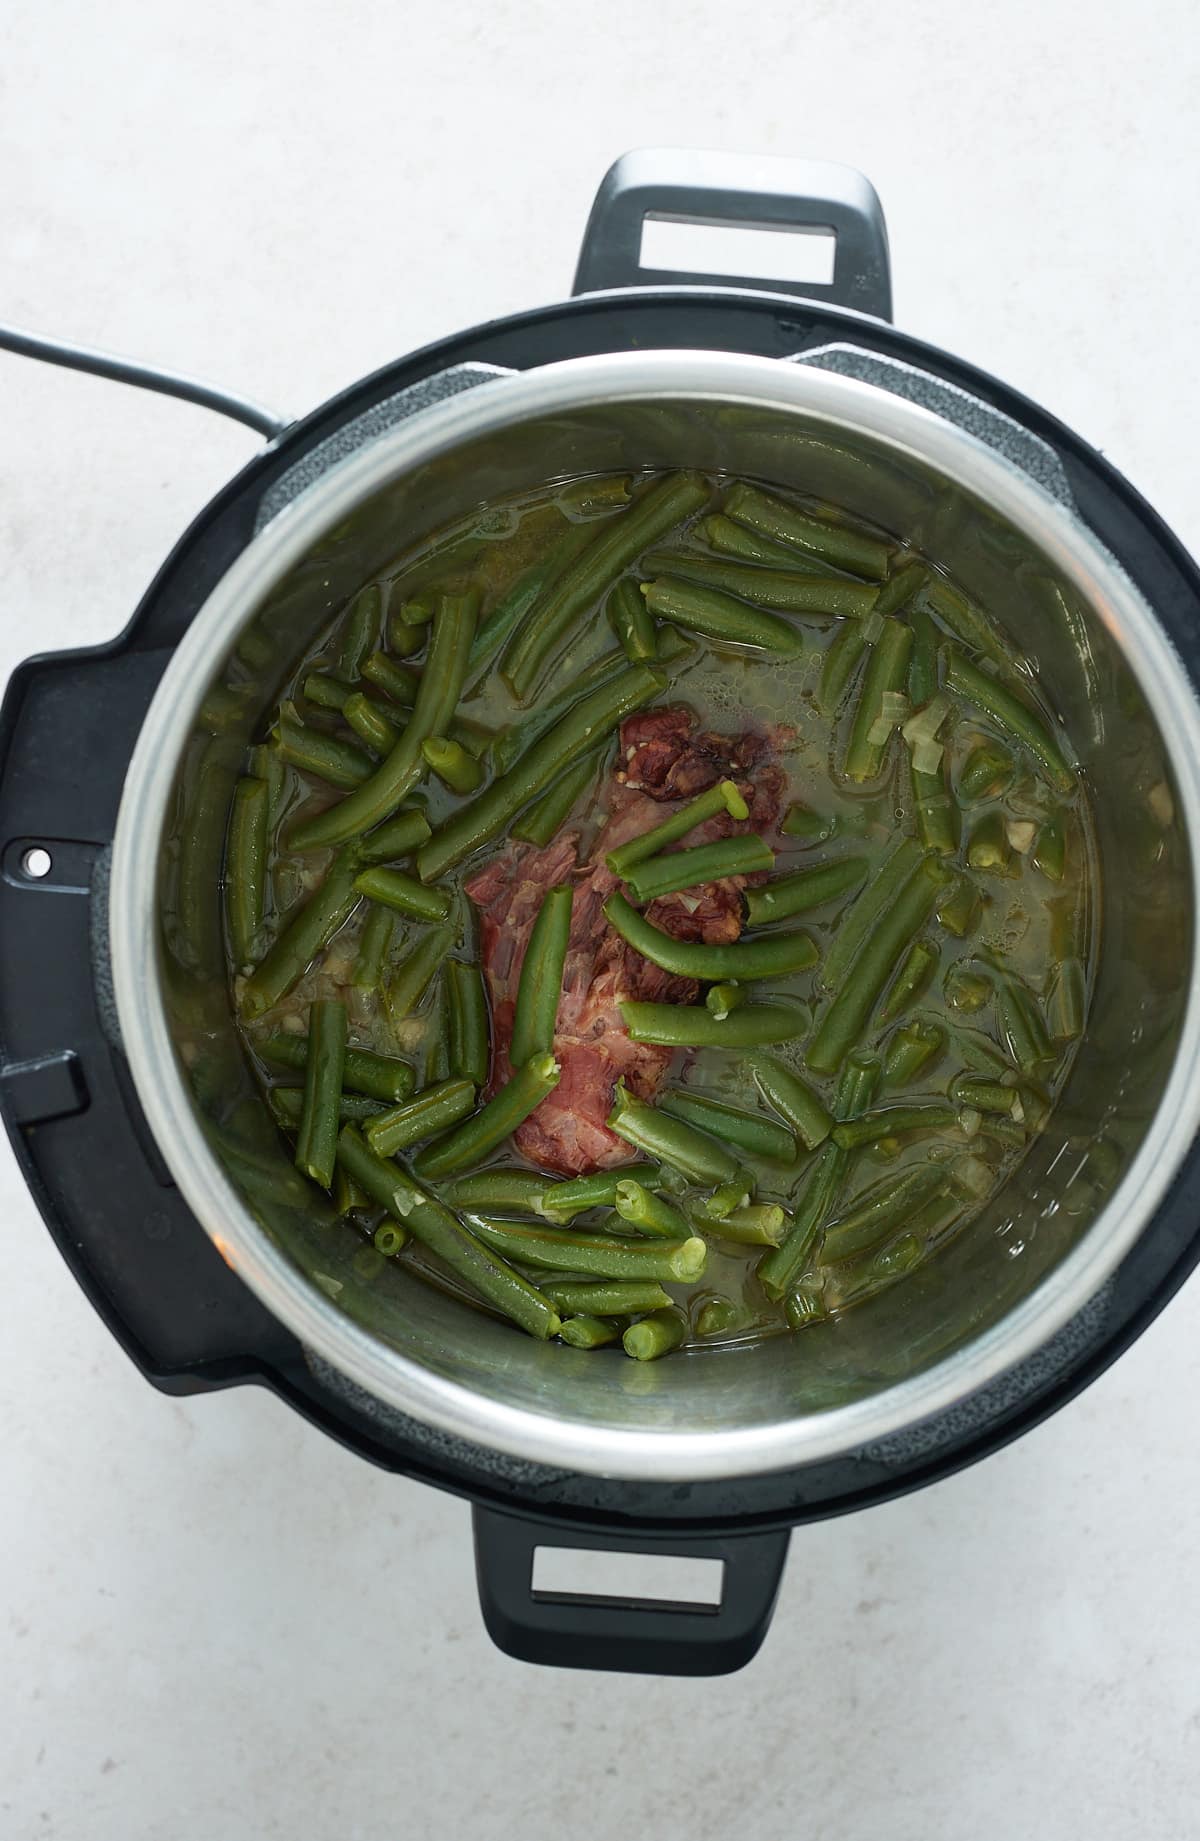 cooked green beans and smoked turkey in an instant pot